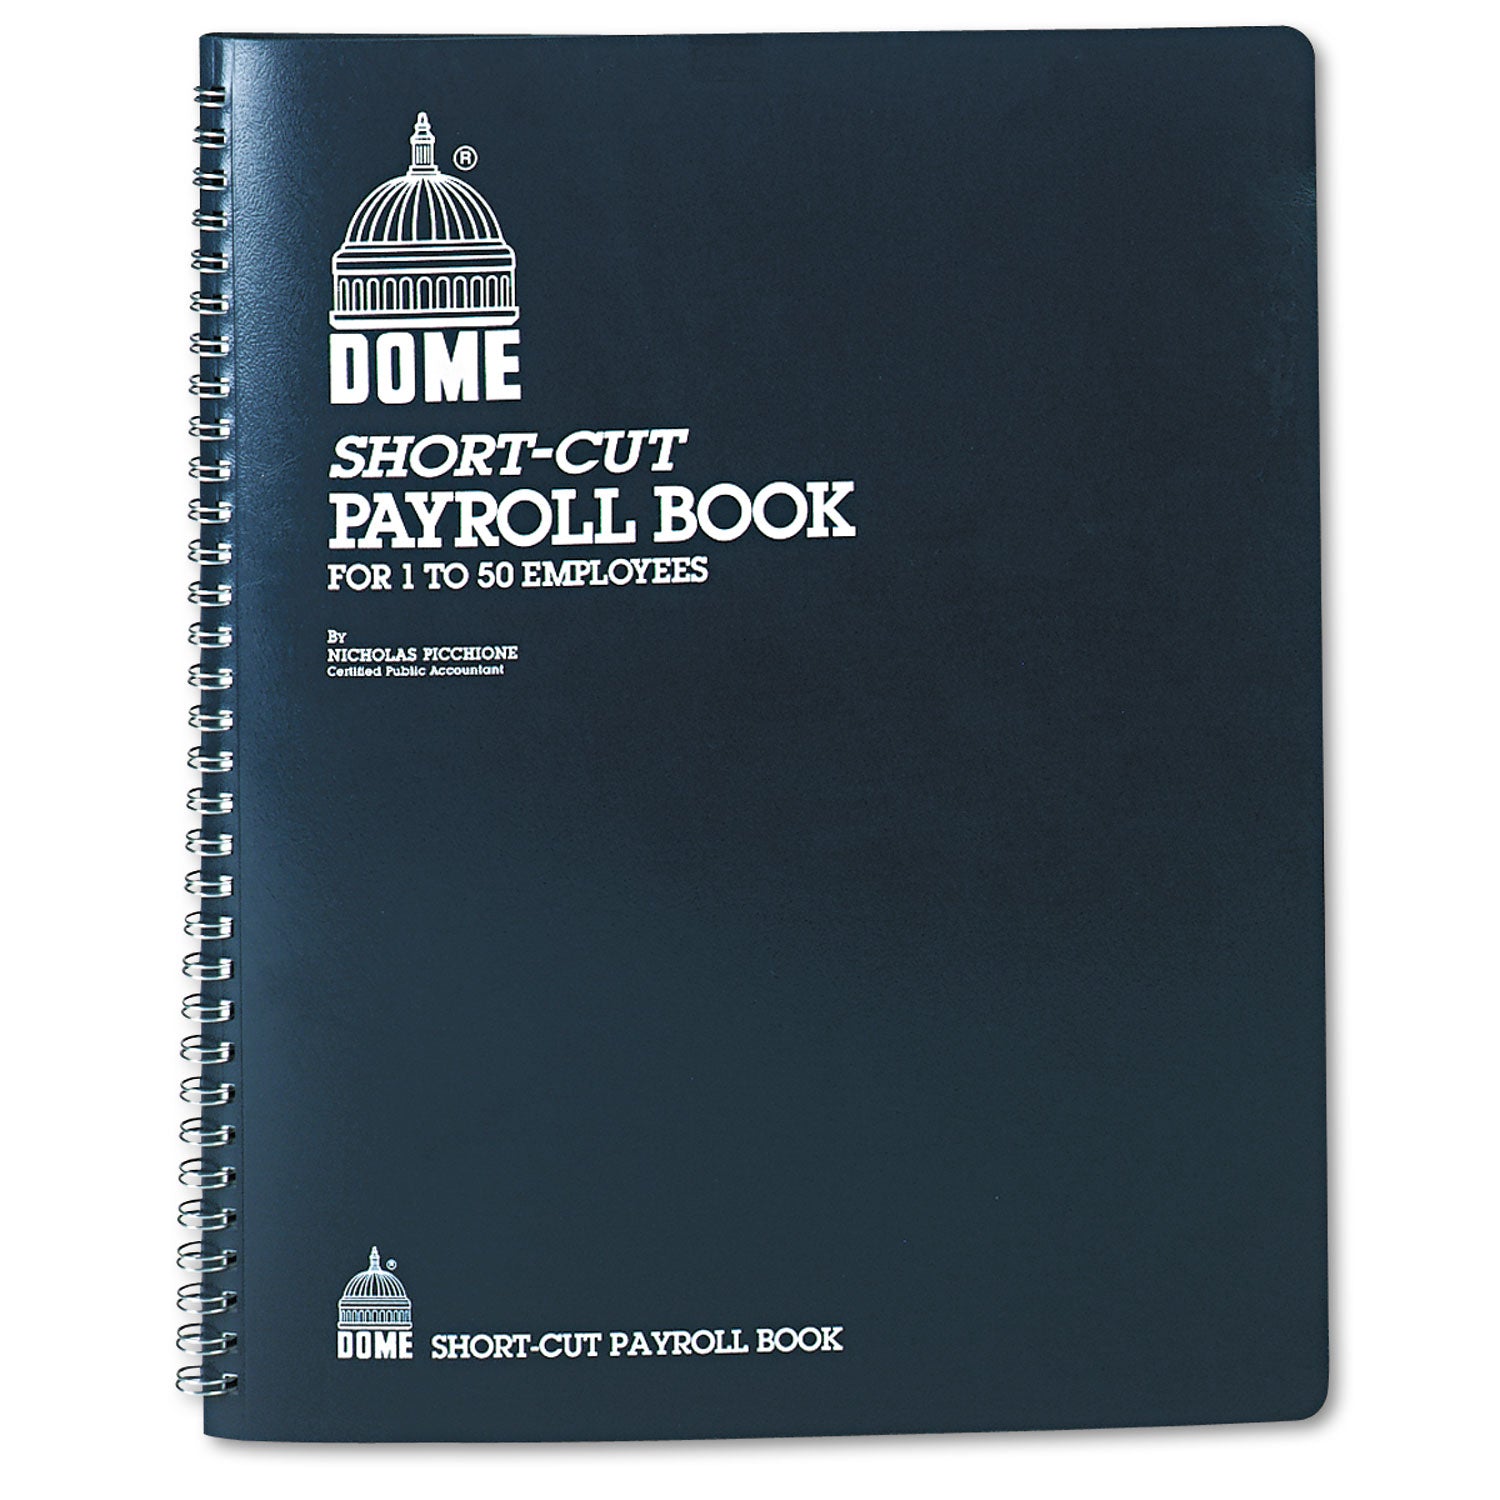 Single Entry Monthly Payroll (50 Employee) Record, Double-Page 7-Column Format, Blue Cover, 11 x 8.5 Sheets, 128 Sheets/Book - 